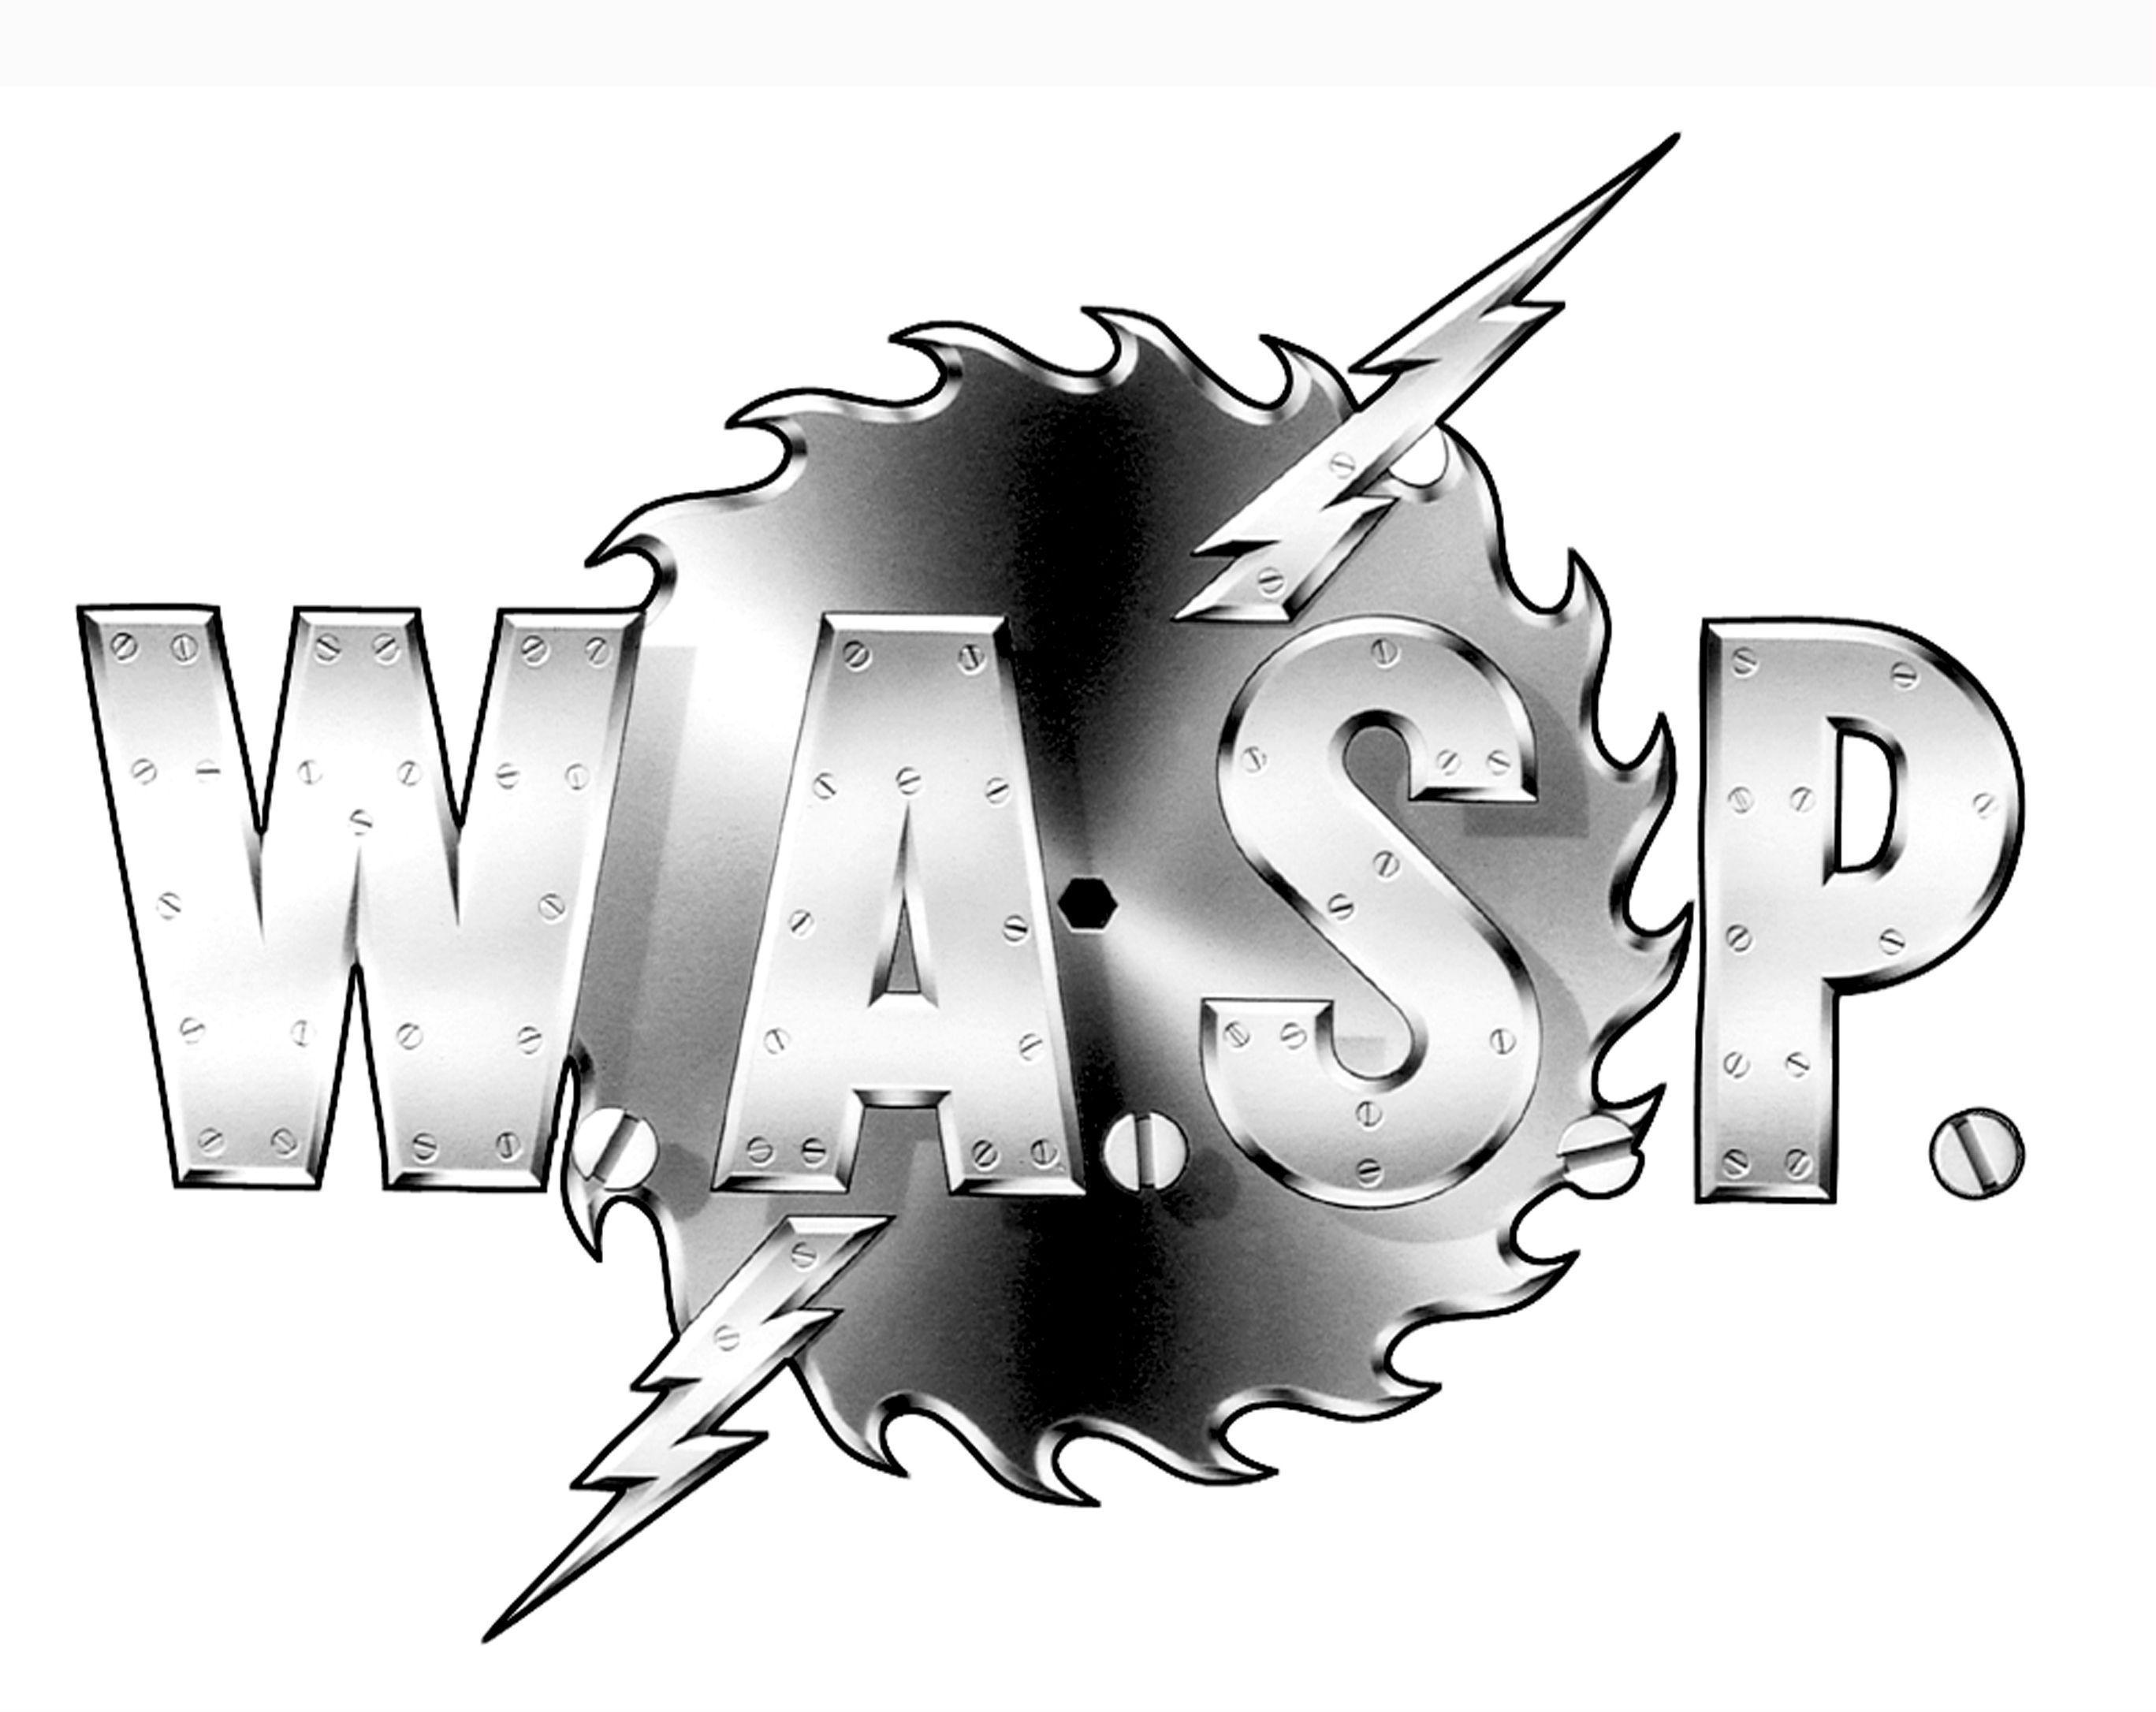 Wasp Band Logo - Metal Icon W.A.S.P. Sign to Napalm Records; New Album Set